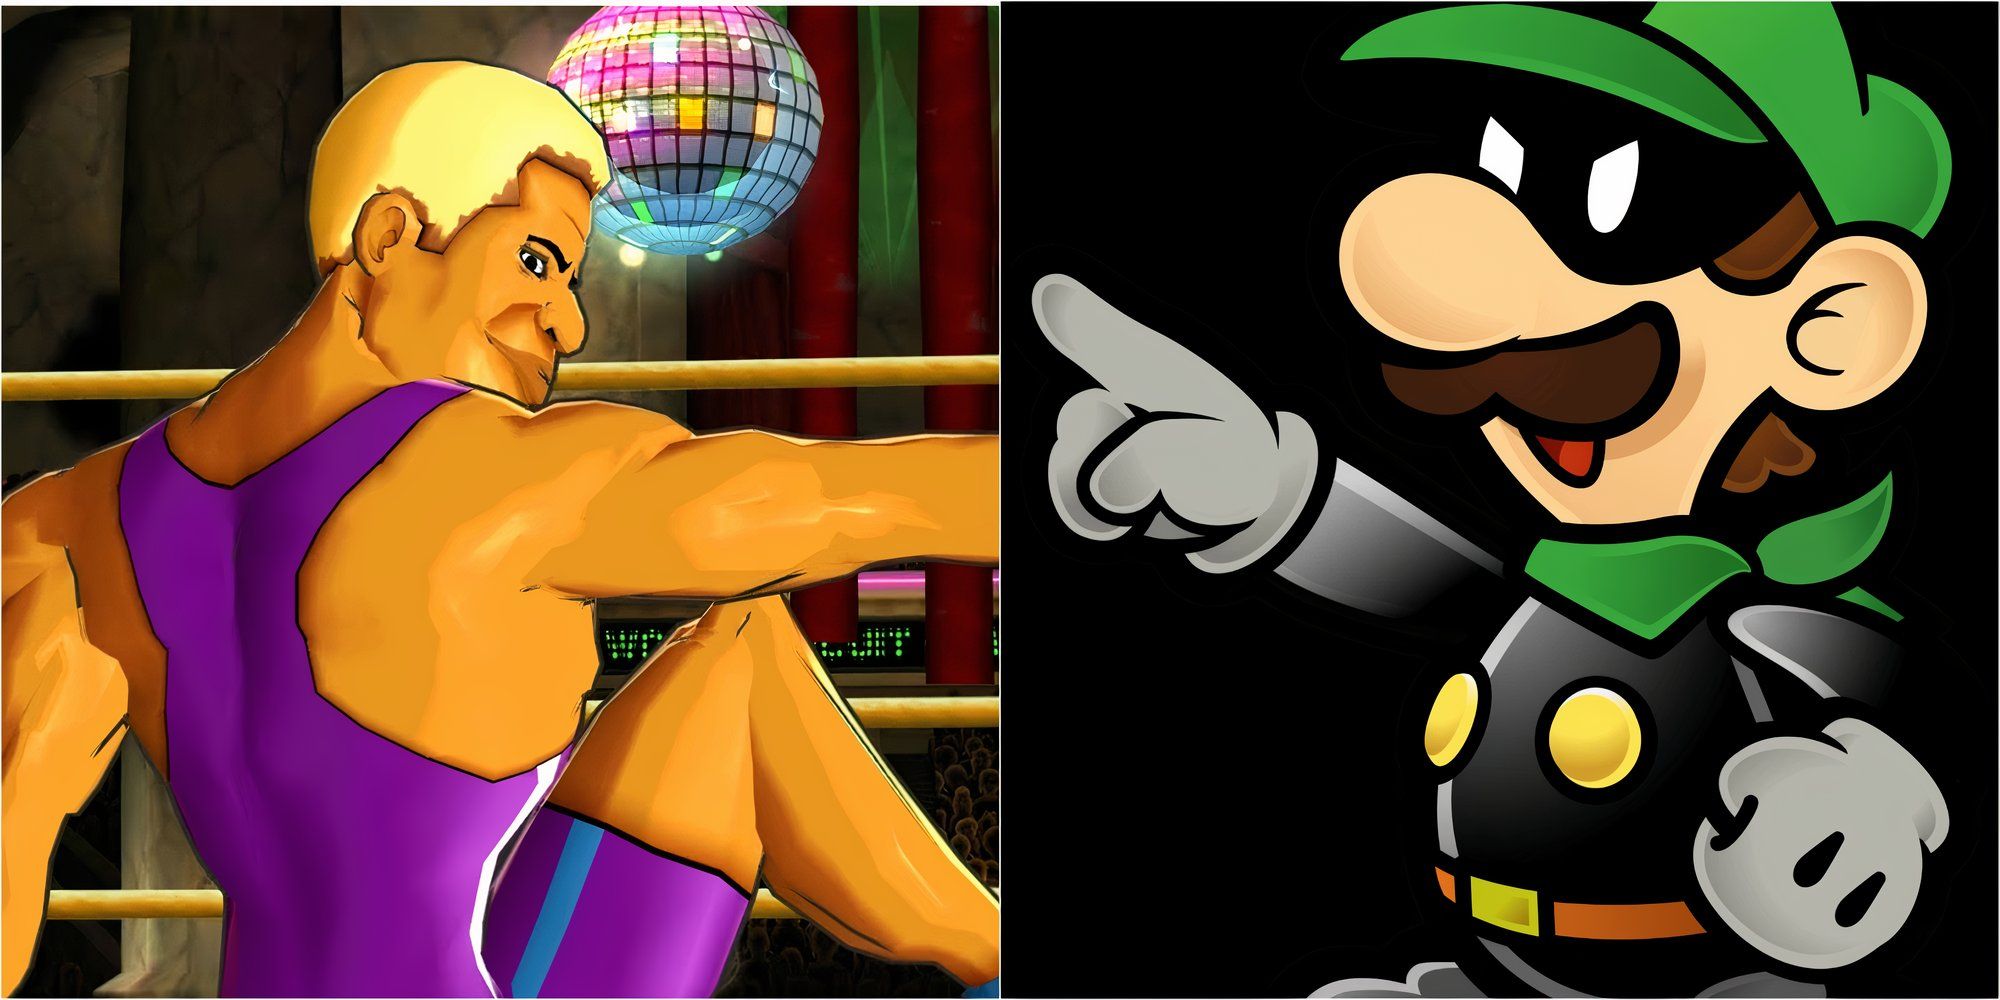 Disco Kid in Punch-Out and Mr. L in Super Paper Mario